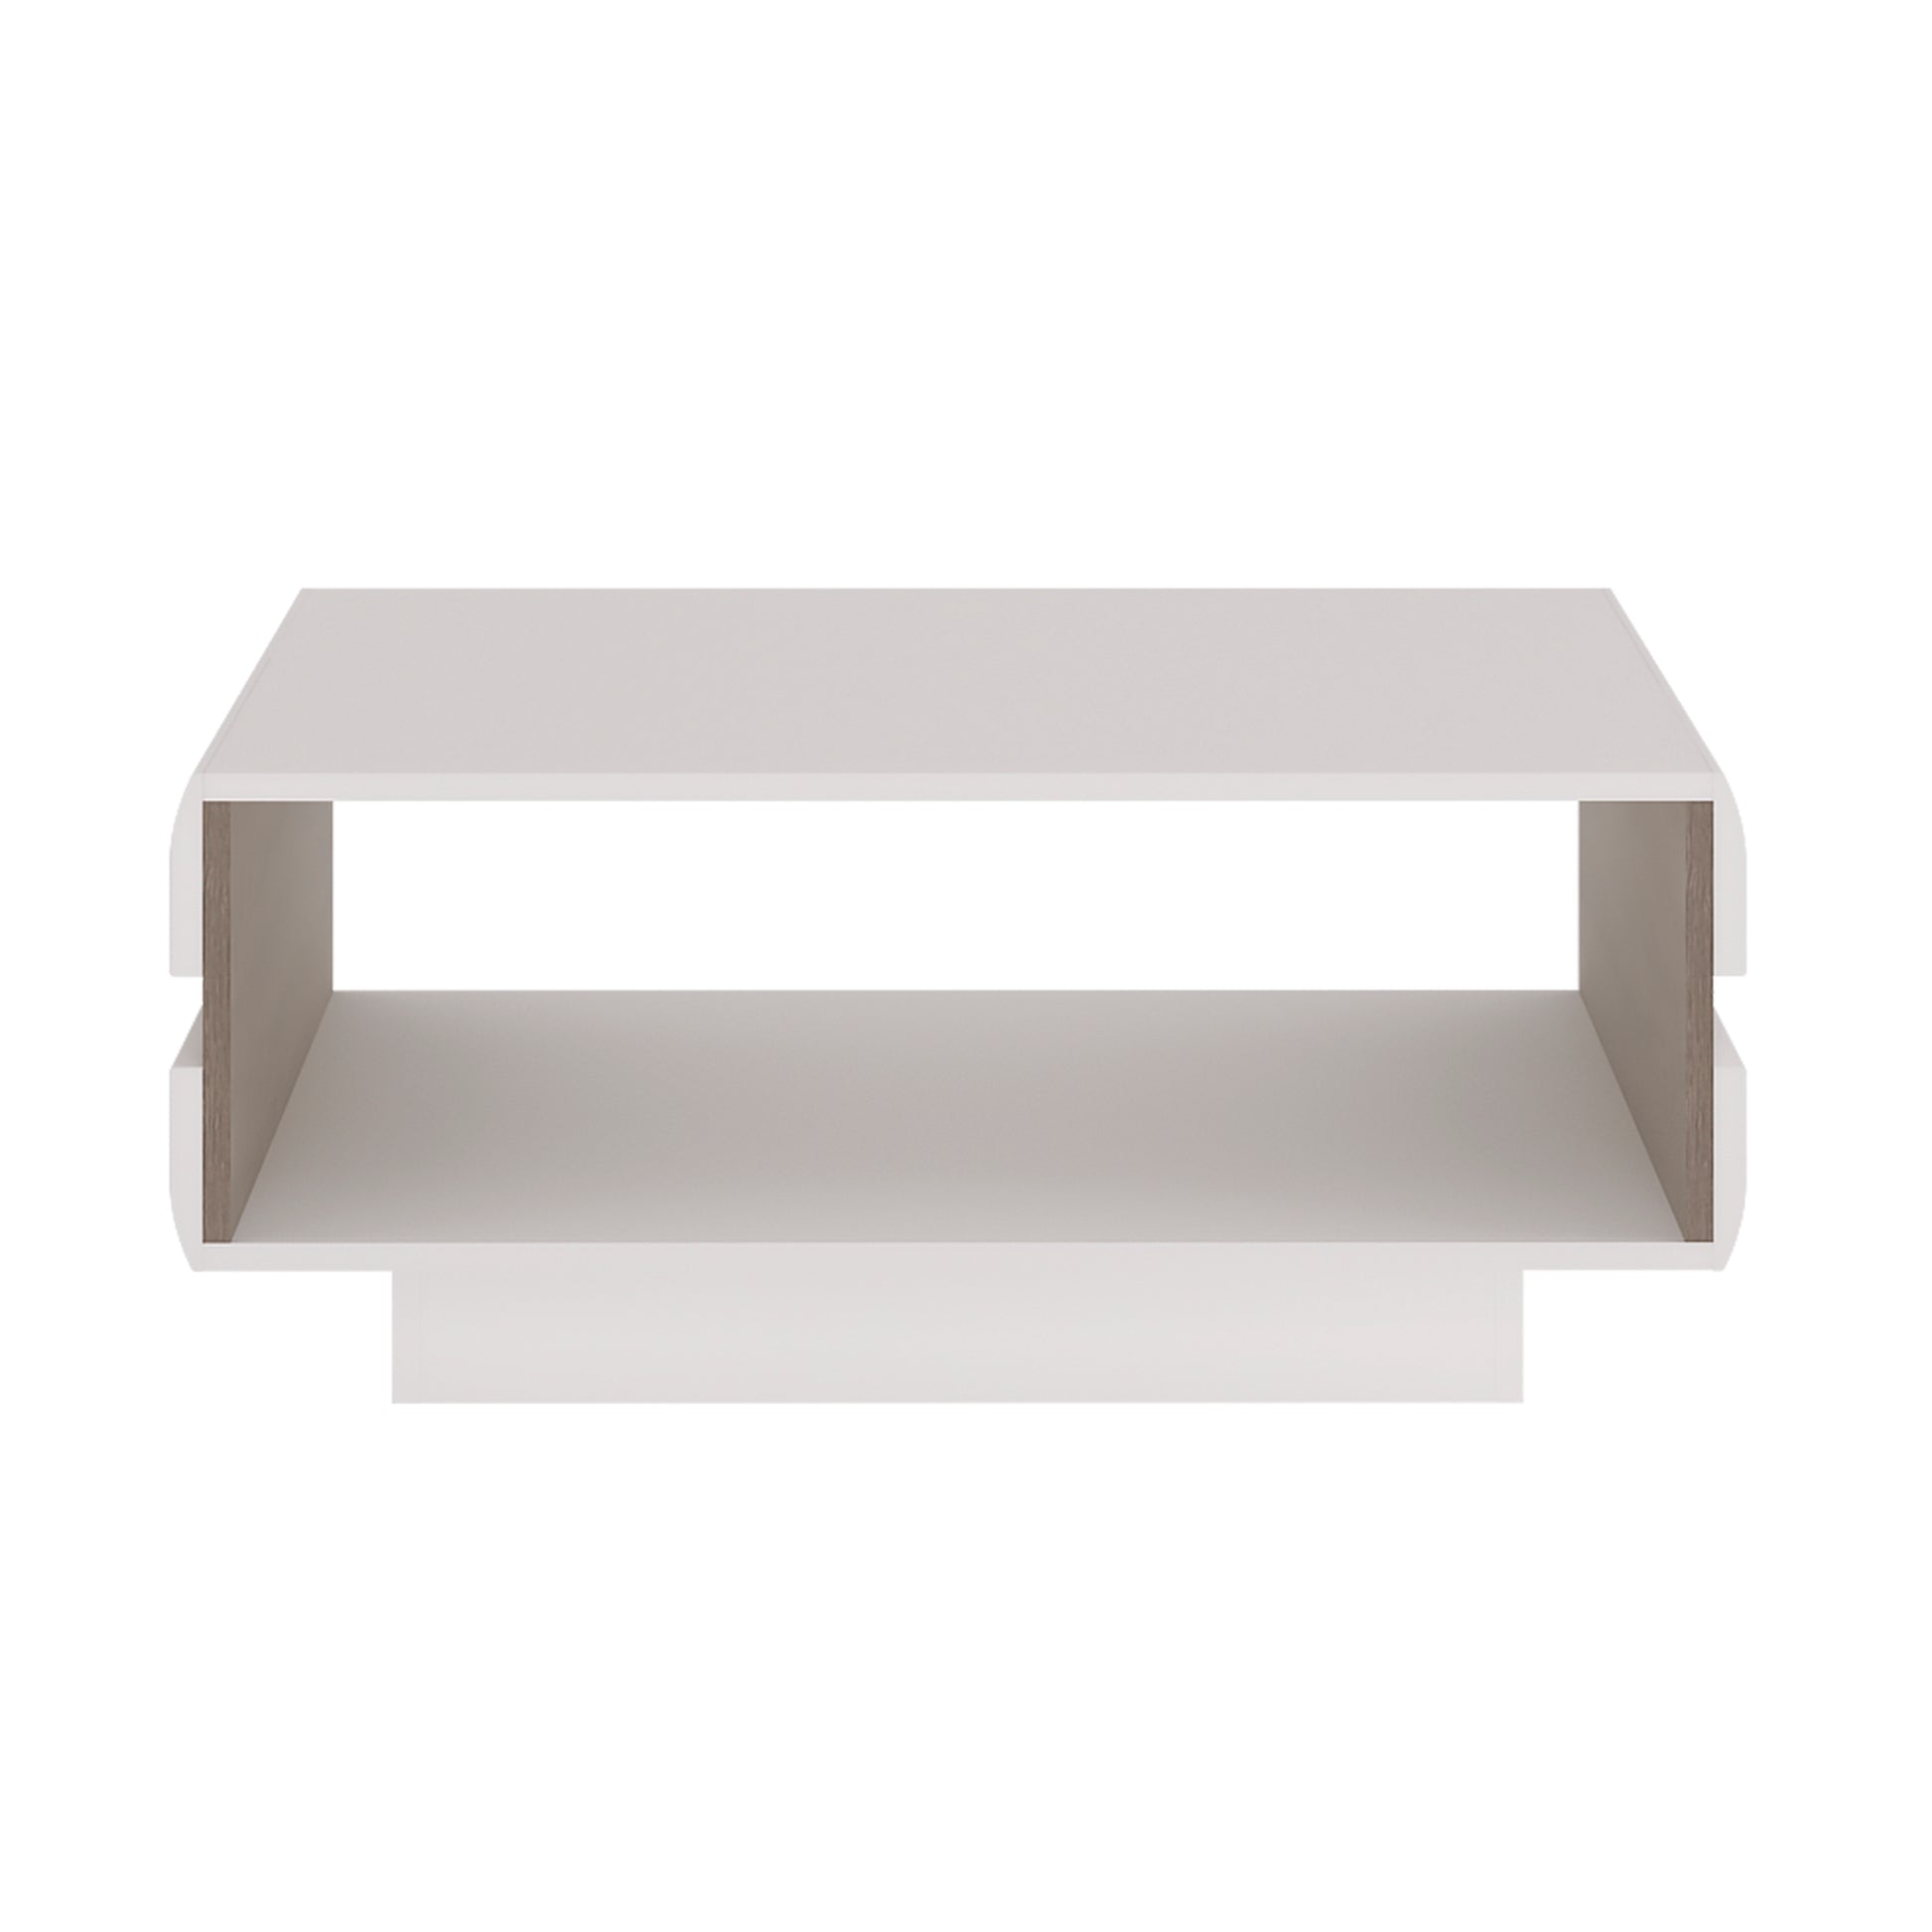 Chelsea  Large Designer Coffee Table in White with Oak Trim